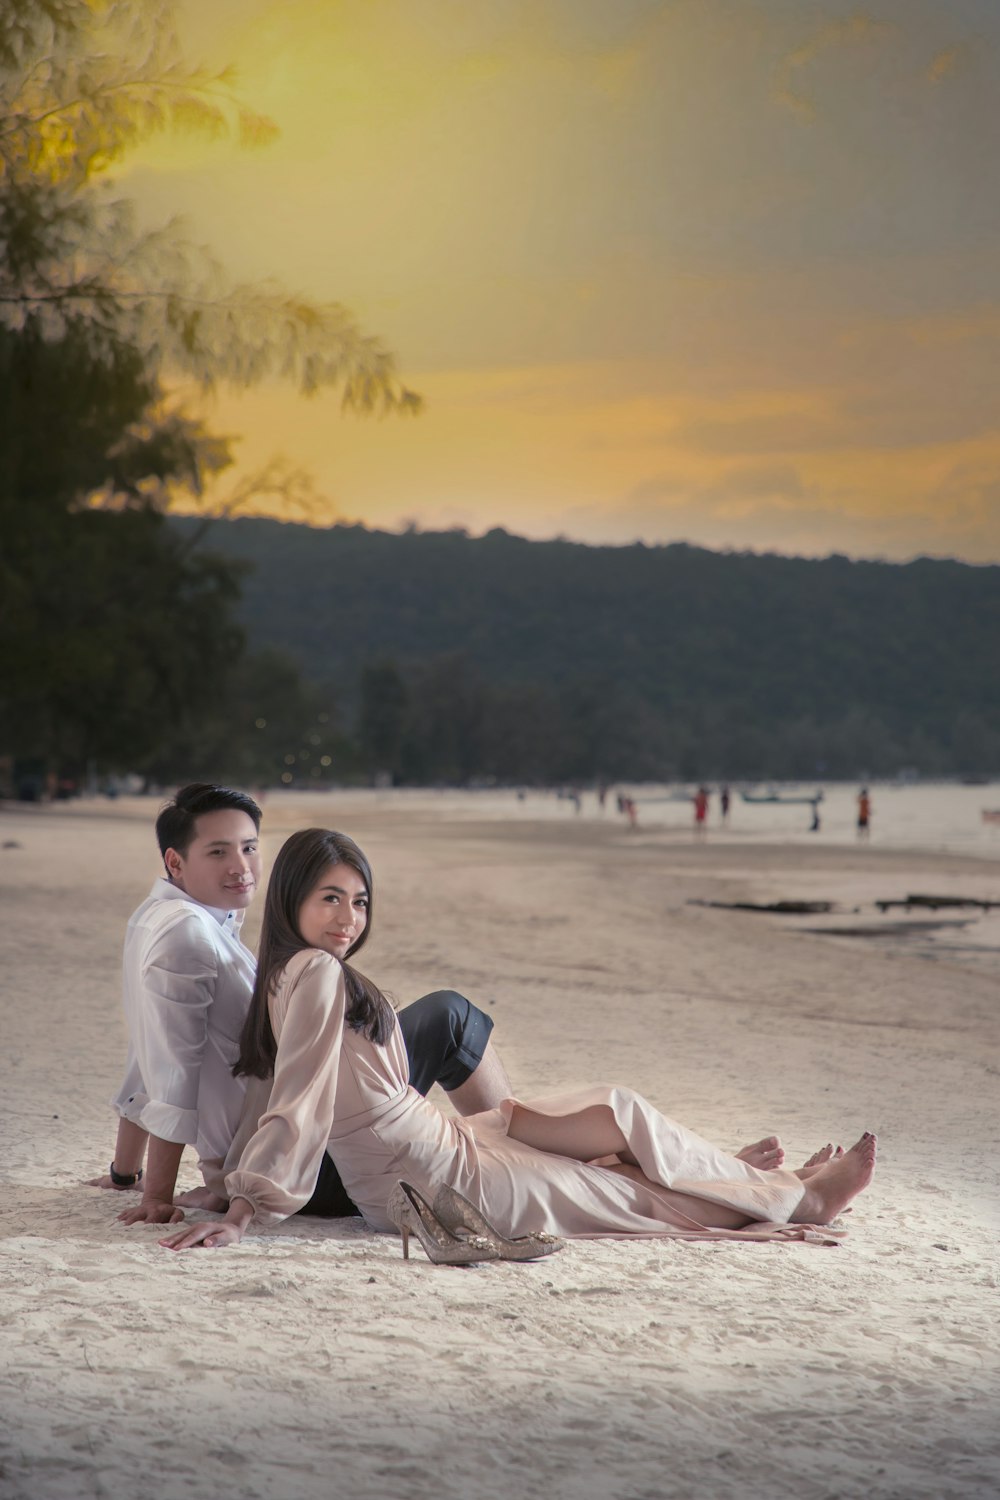 man and woman sitting on sand during sunset